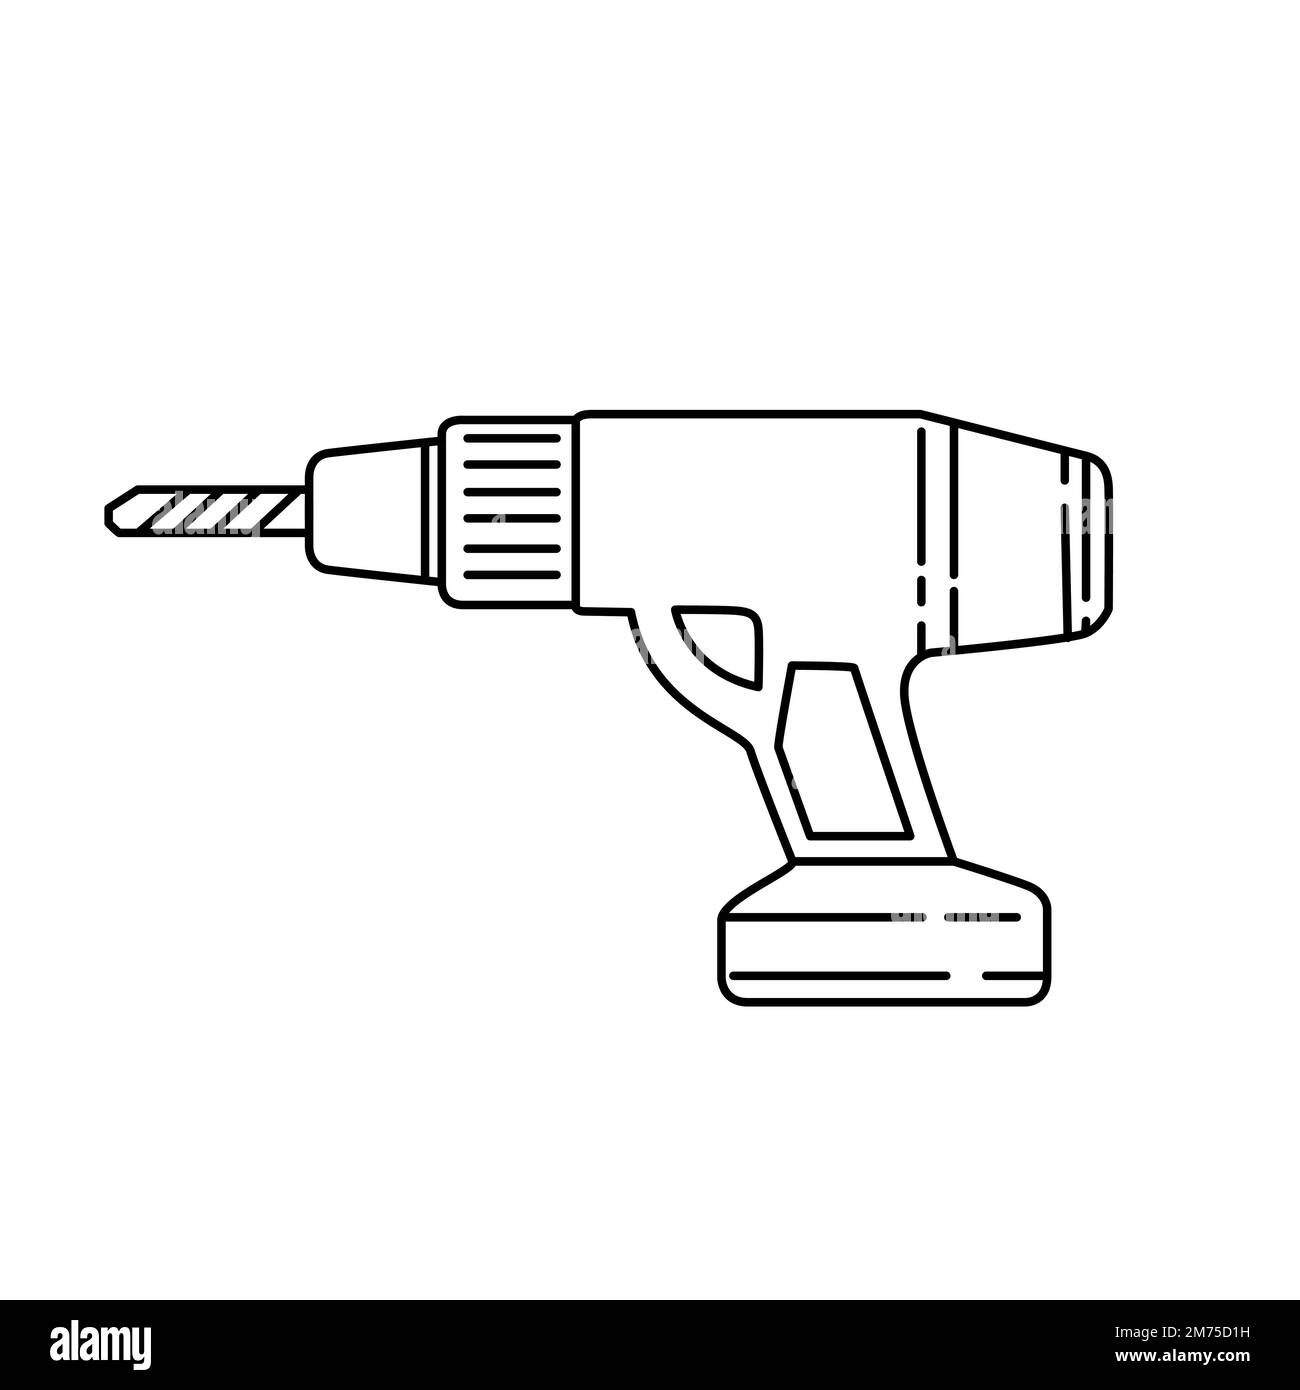 Drill symbol Black and White Stock Photos & Images - Alamy